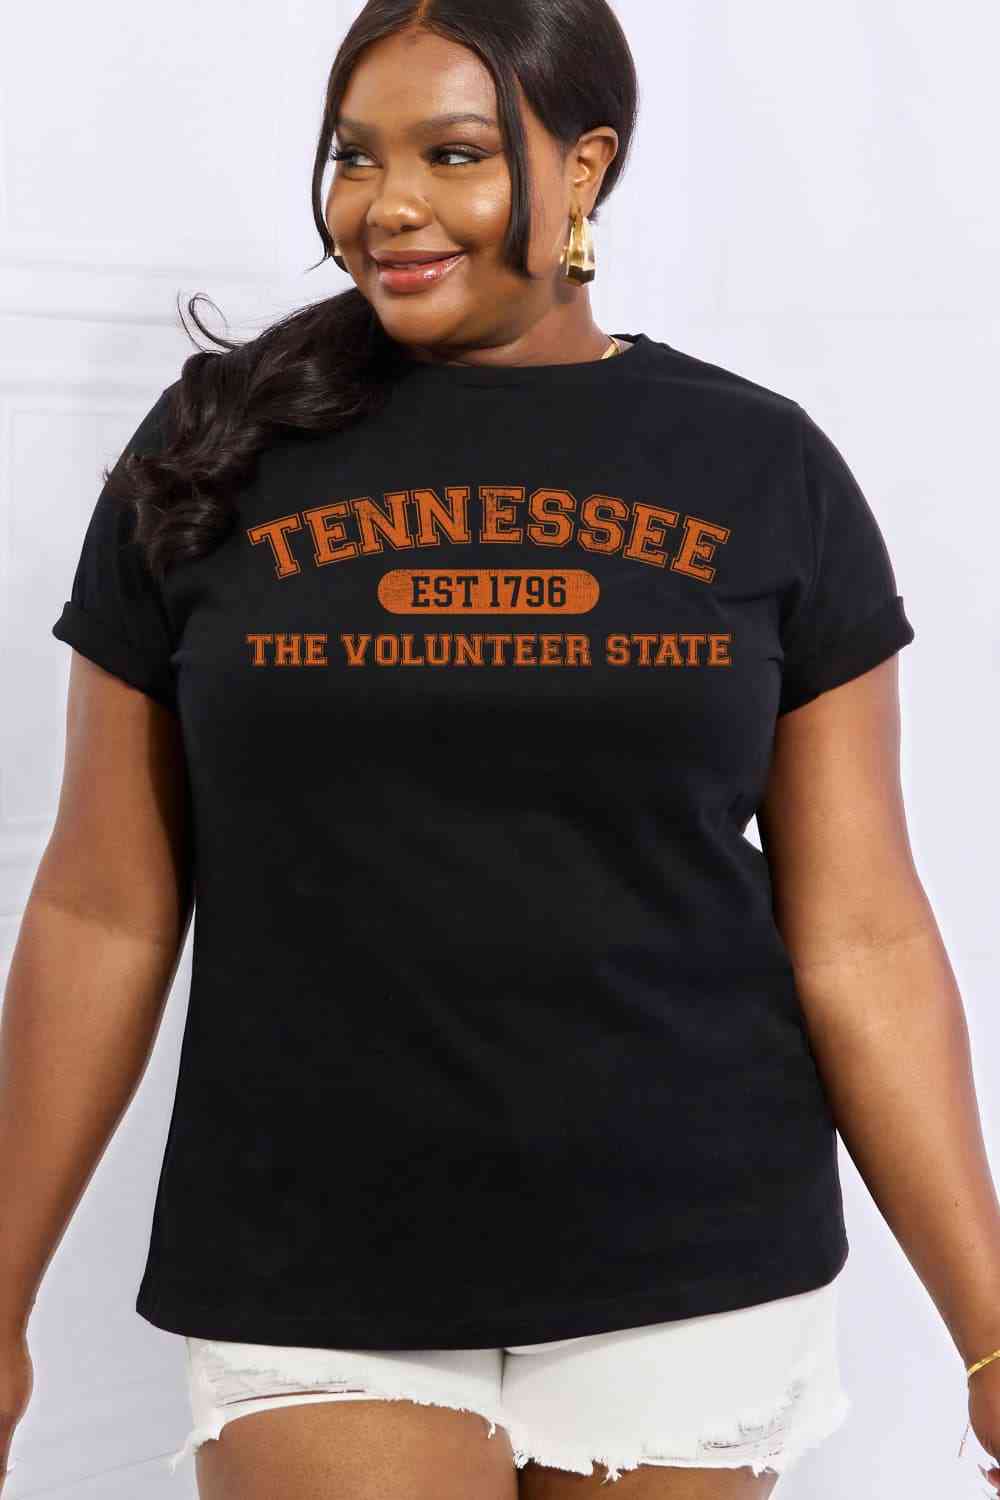 Simply Love Full Size TENNESSEE EST 1796 THE VOLUNTEER STATE Graphic Cotton Tee